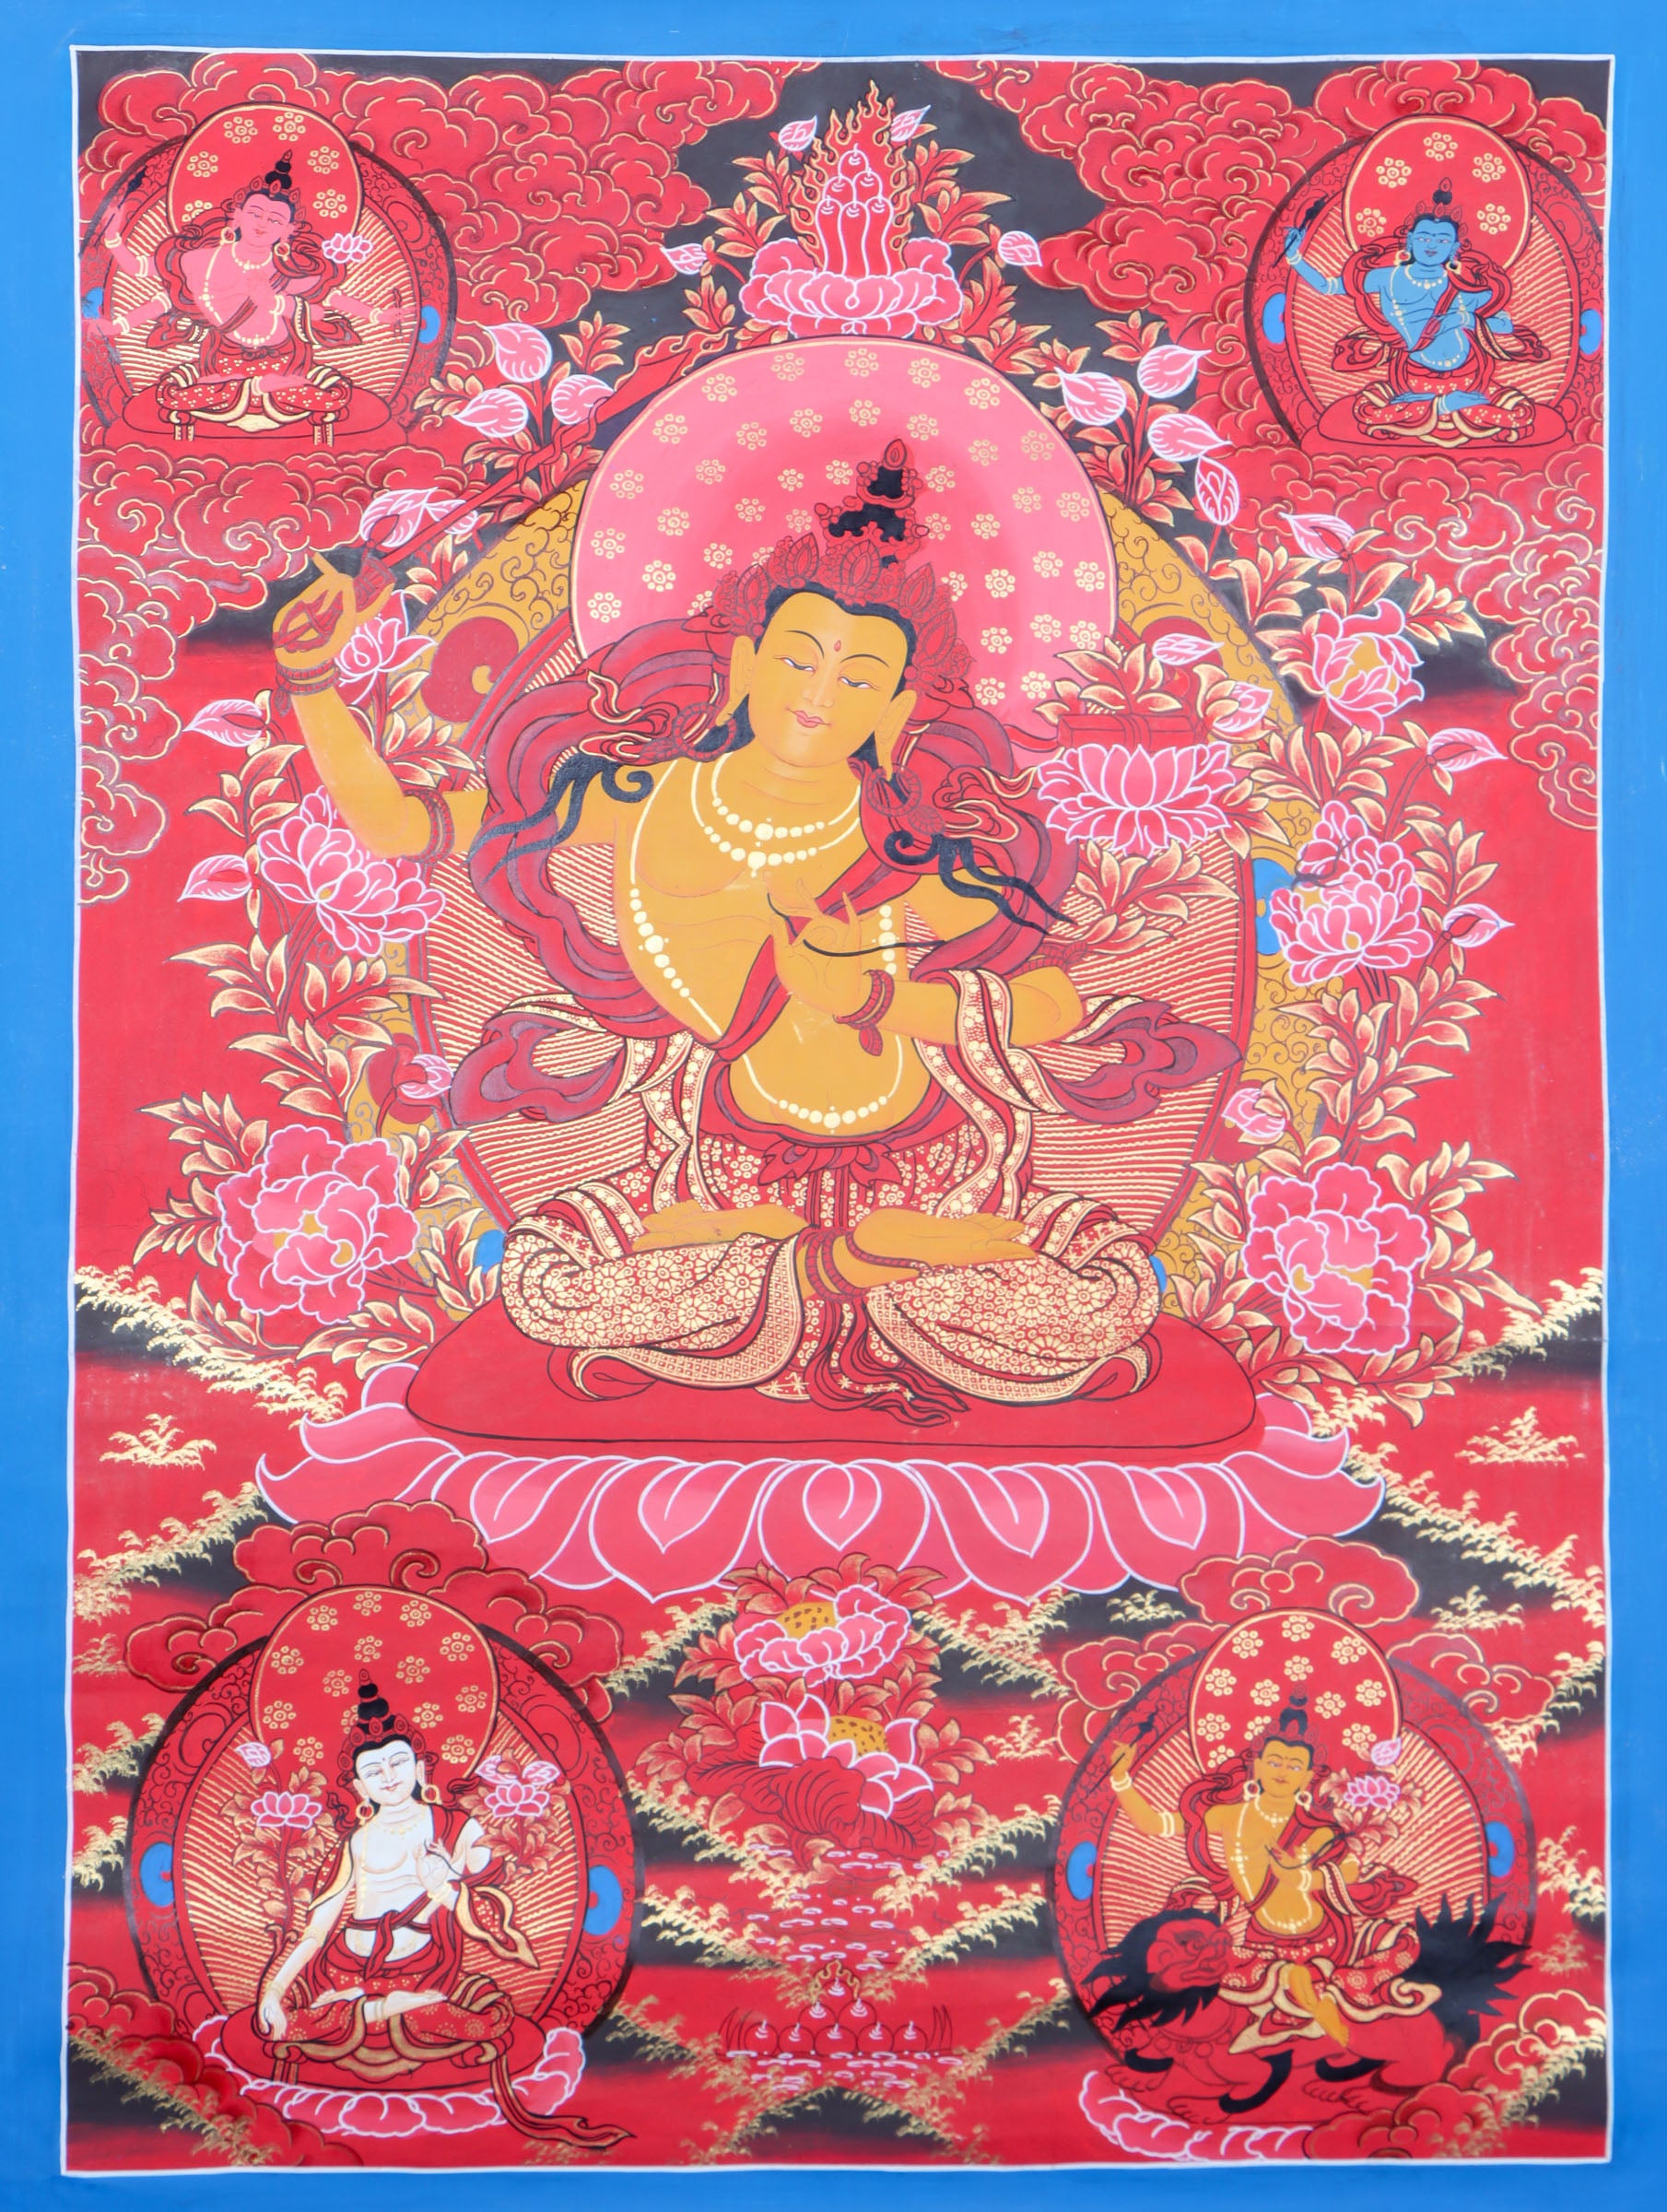 Manjushree Thangka  is a powerful and meaningful artwork for any spiritual practitioner.